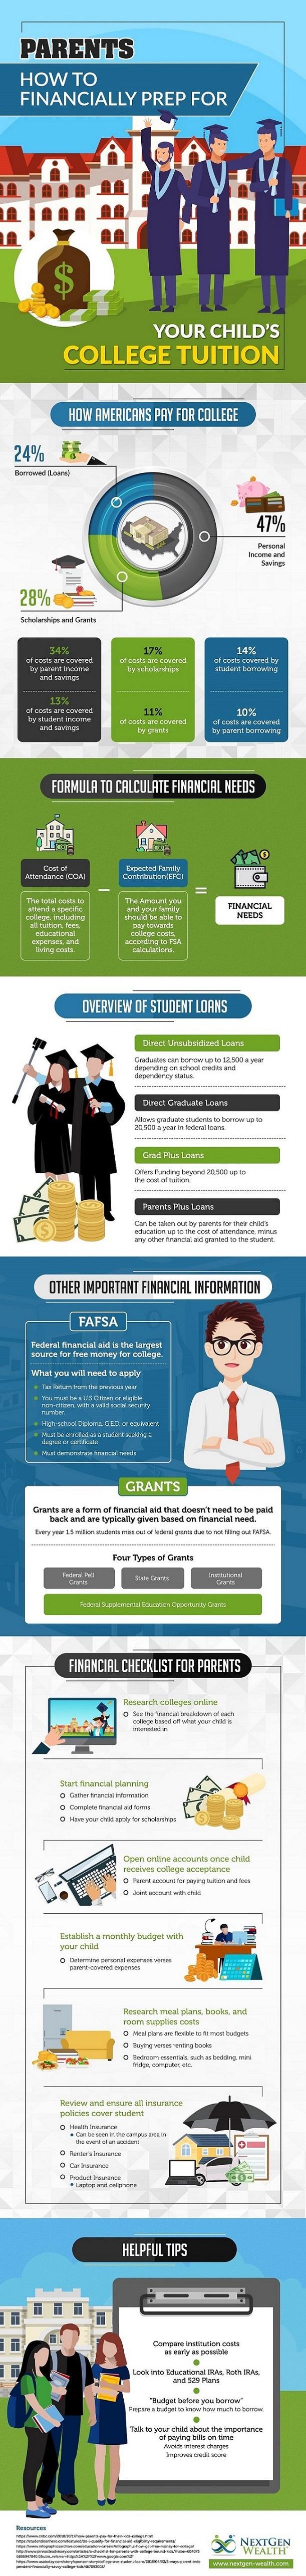 How to Financially Prepare for Your Childs College Tuition